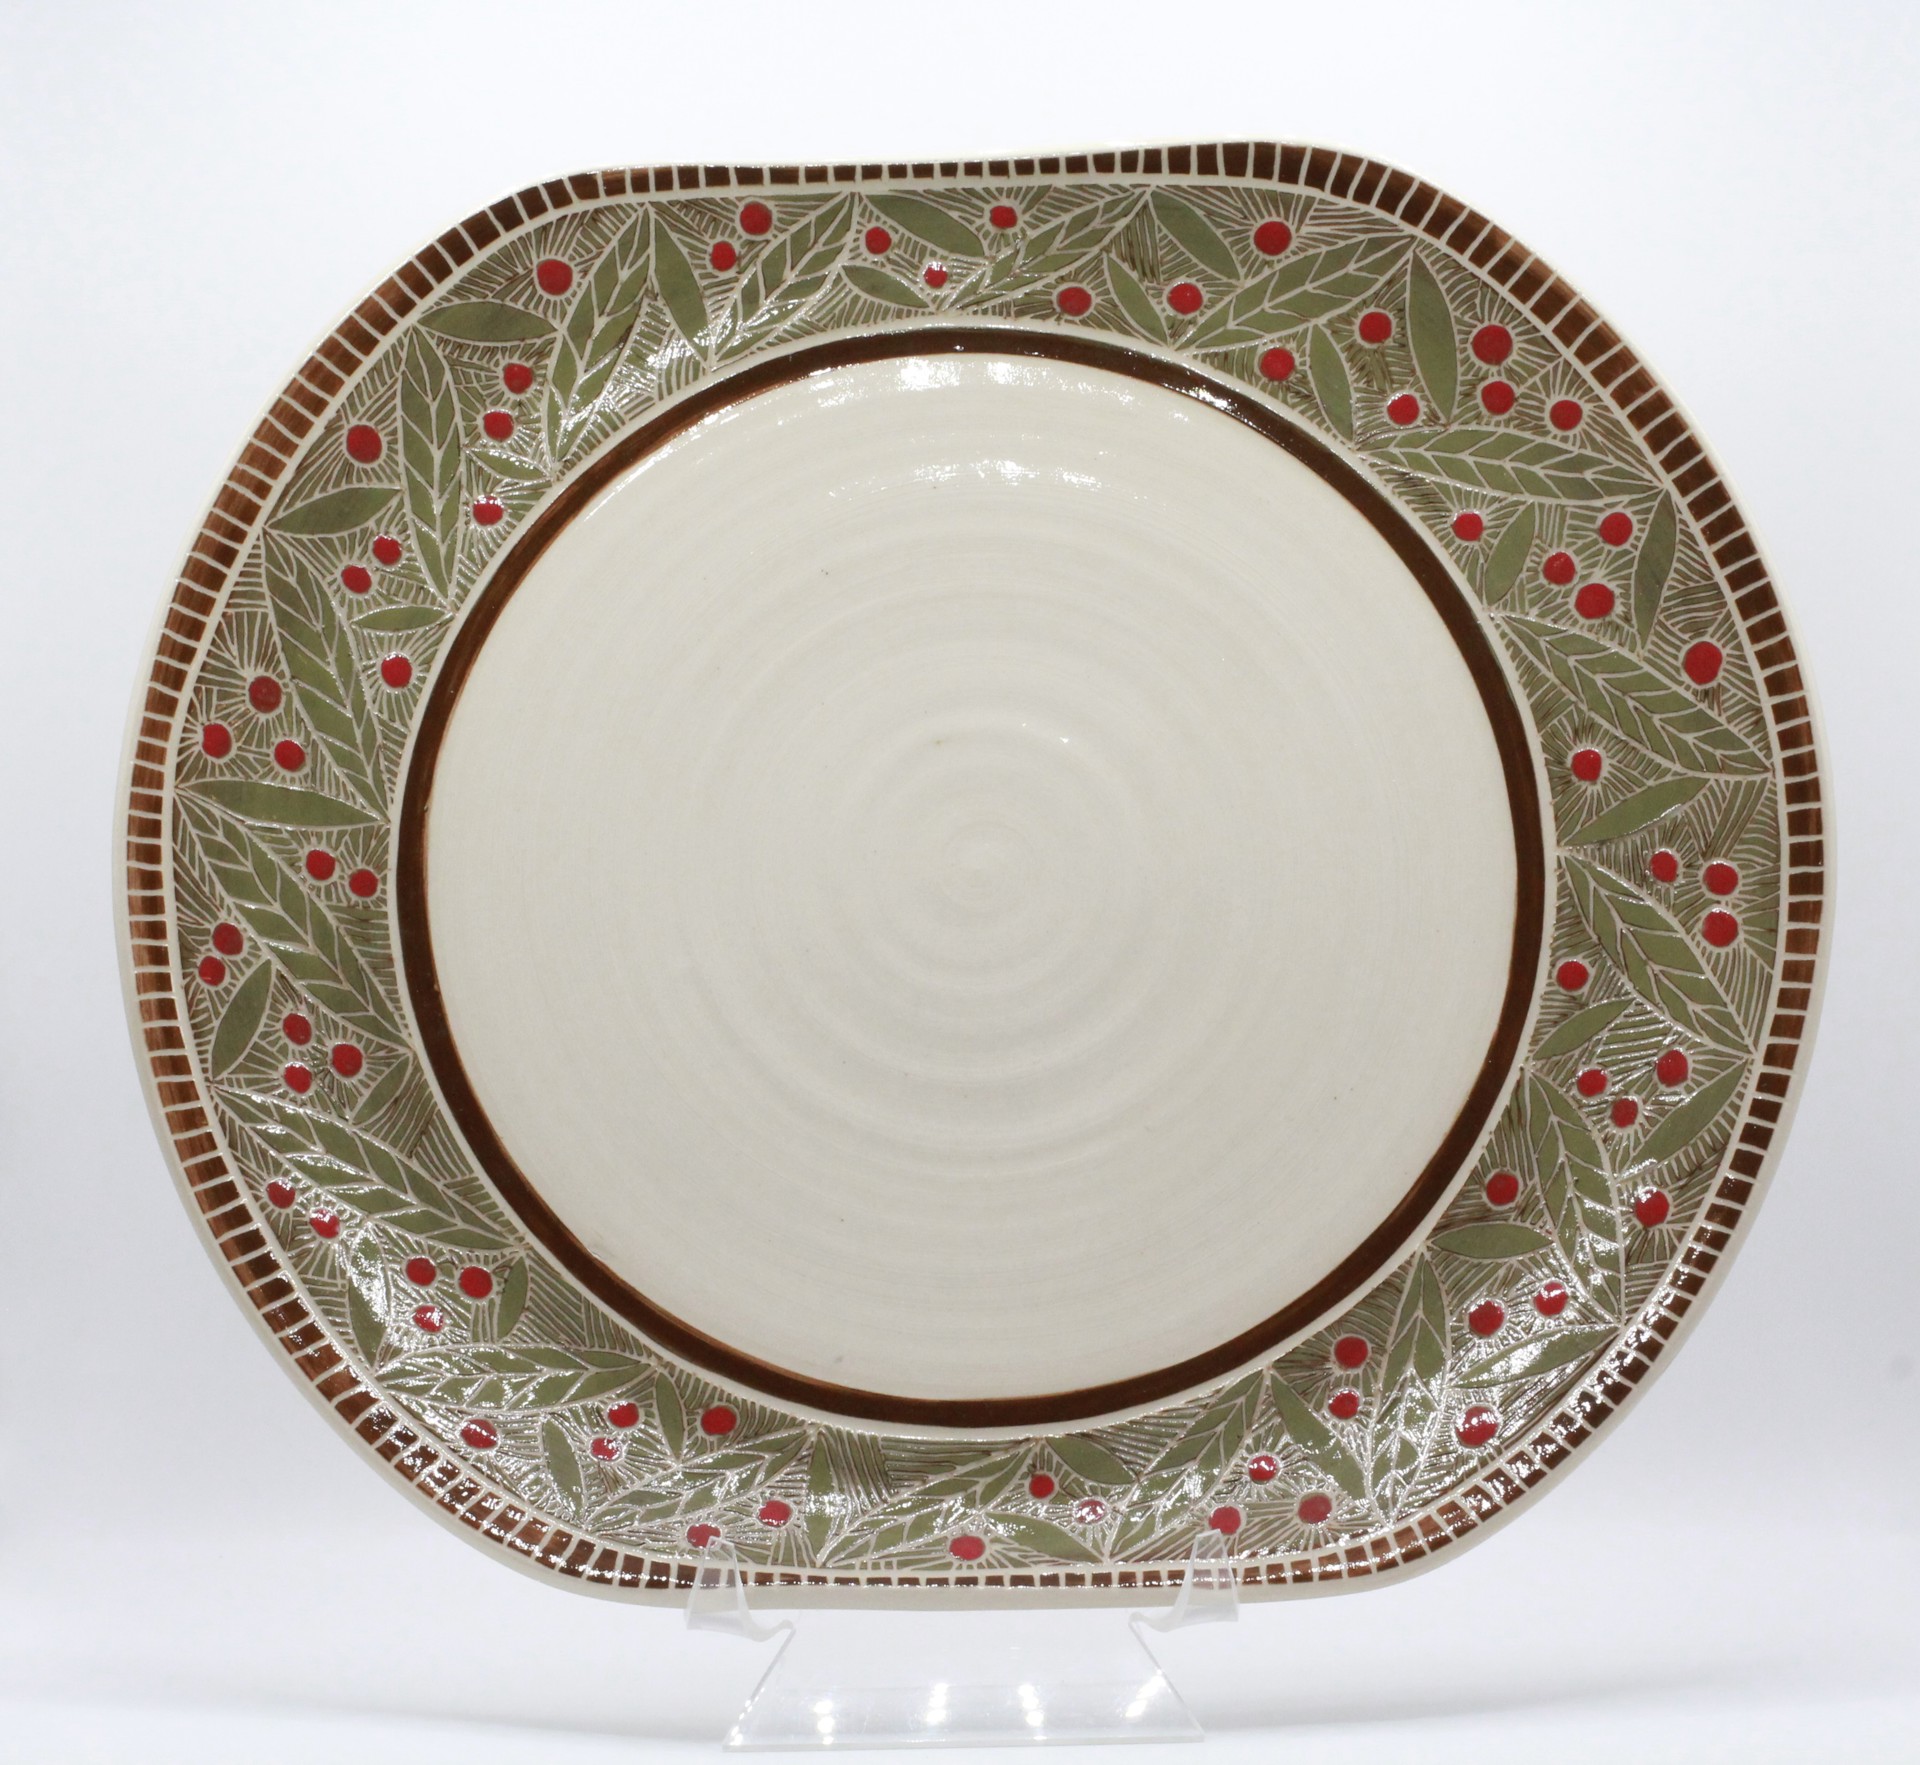 Leaves and Berries Medium Oval Platter by Kelly Price